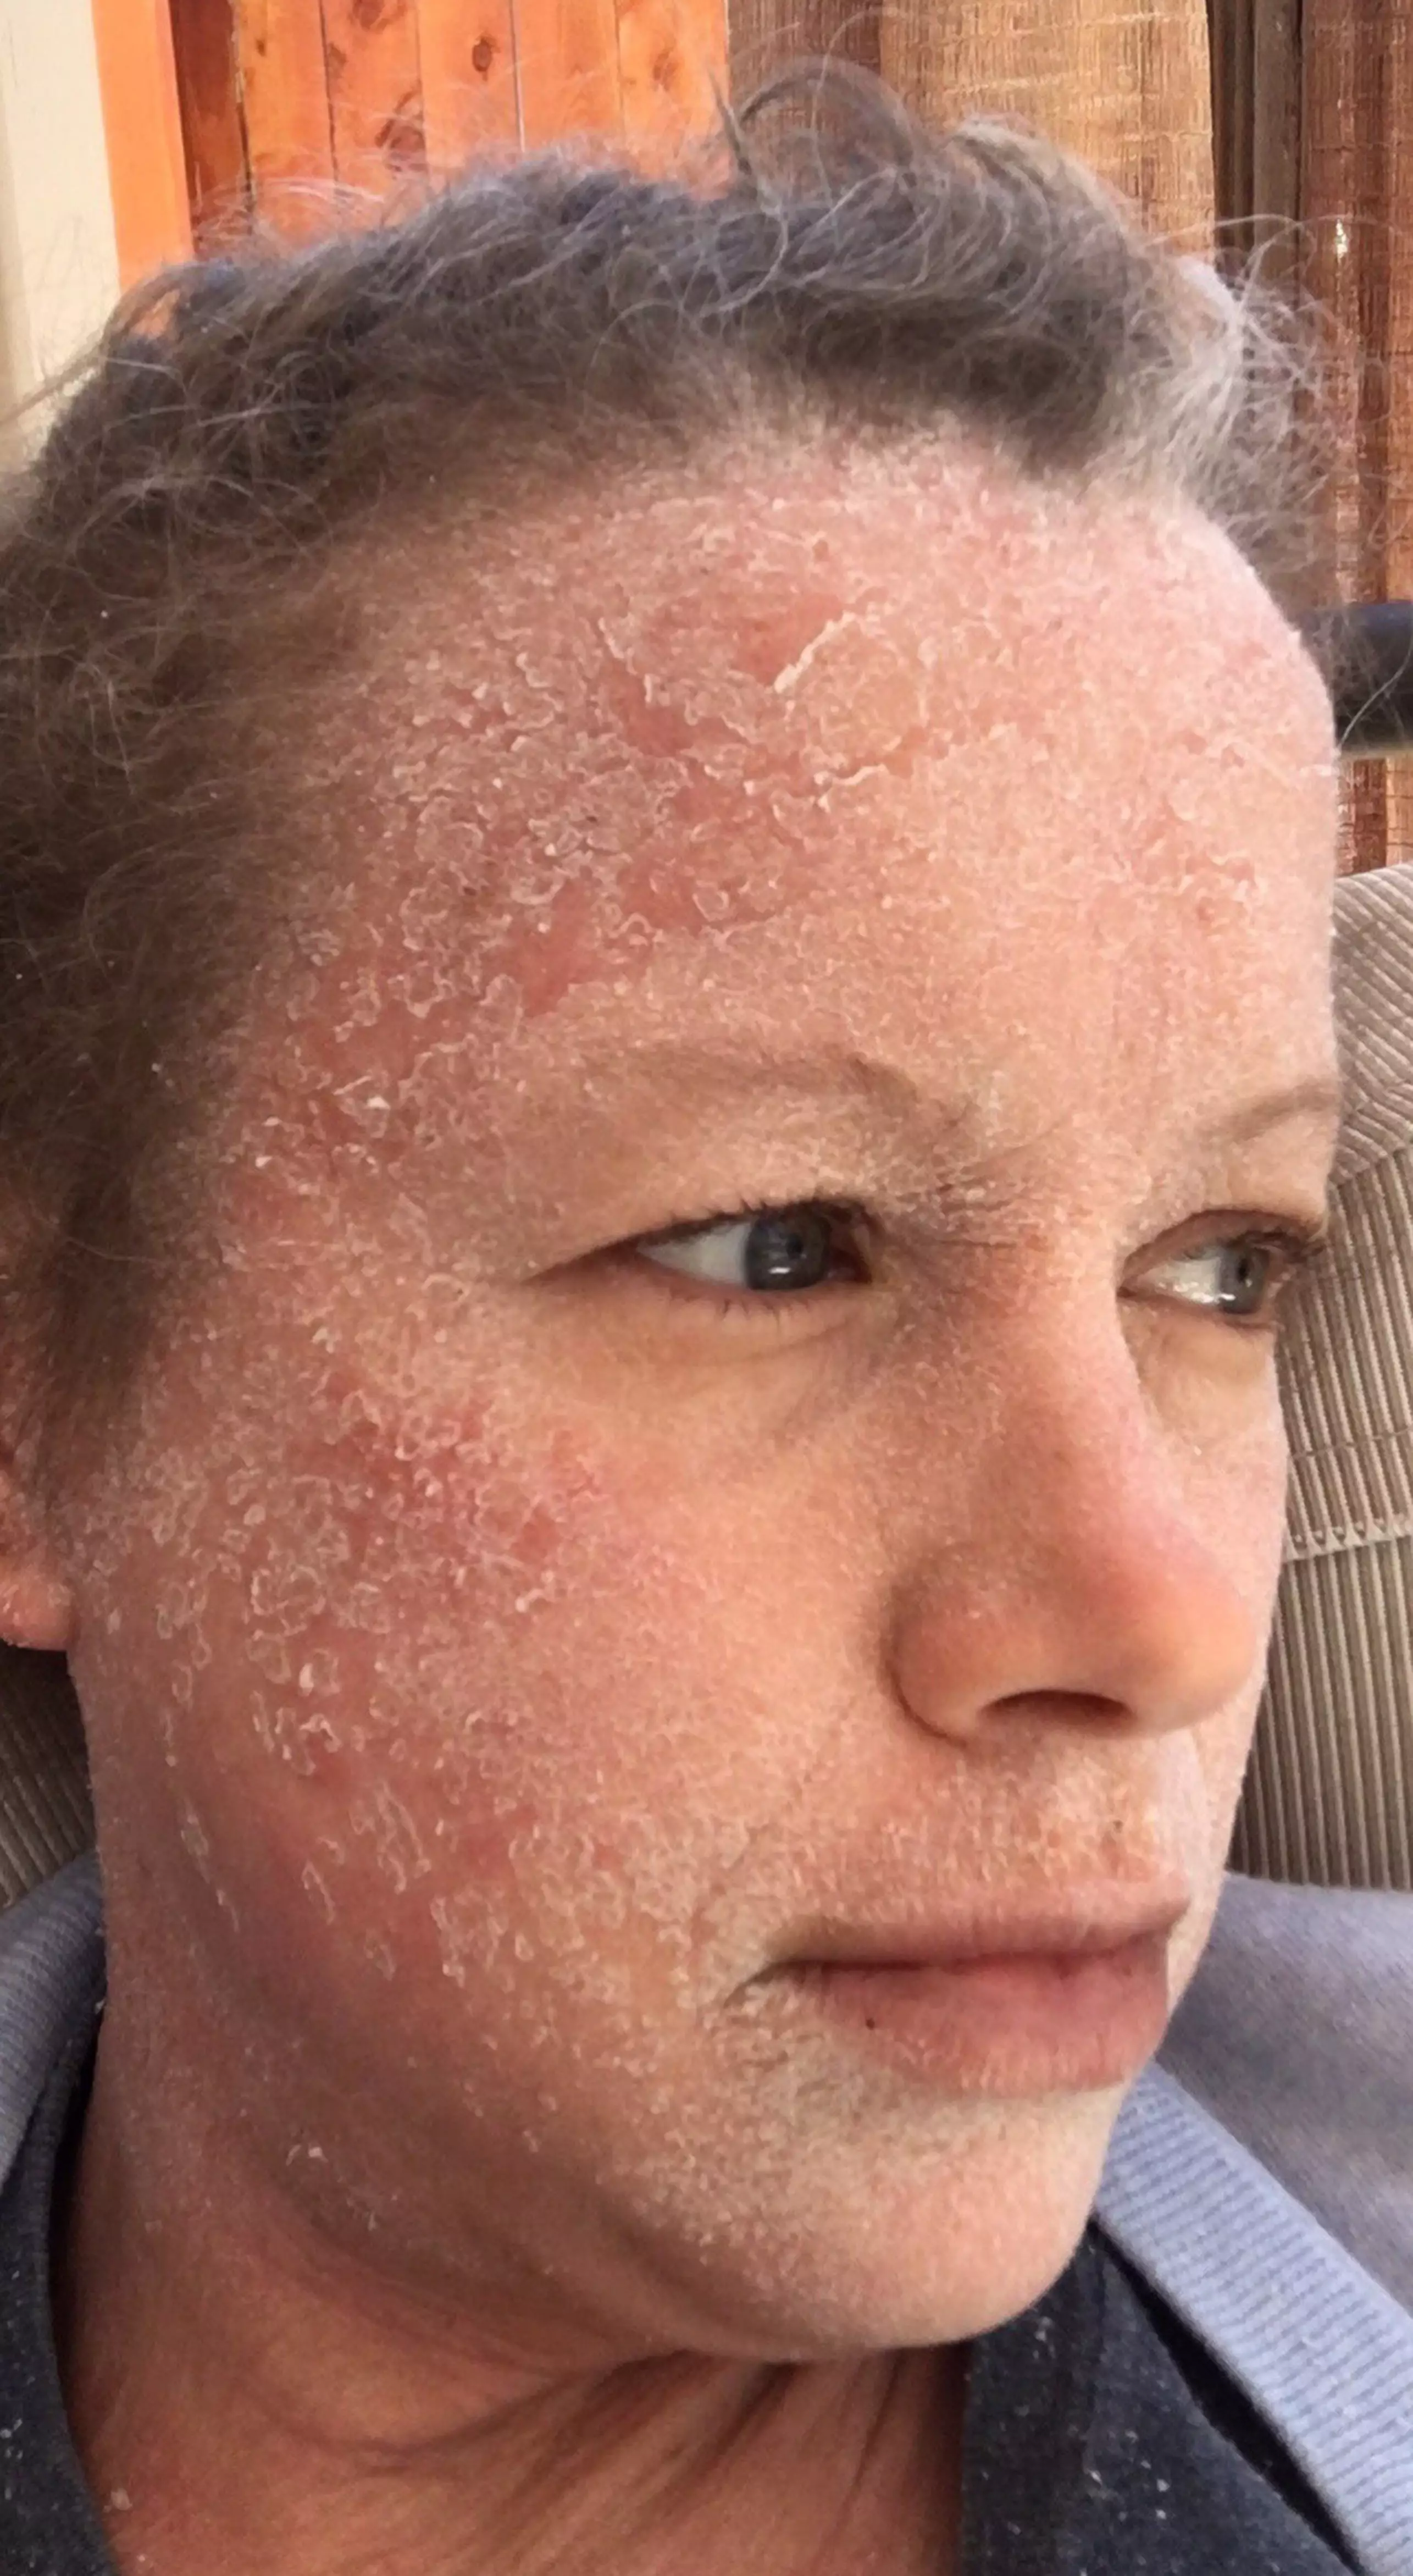 Jennifer Pierce went into withdrawal when she stopped using steroid cream to treat her eczema (